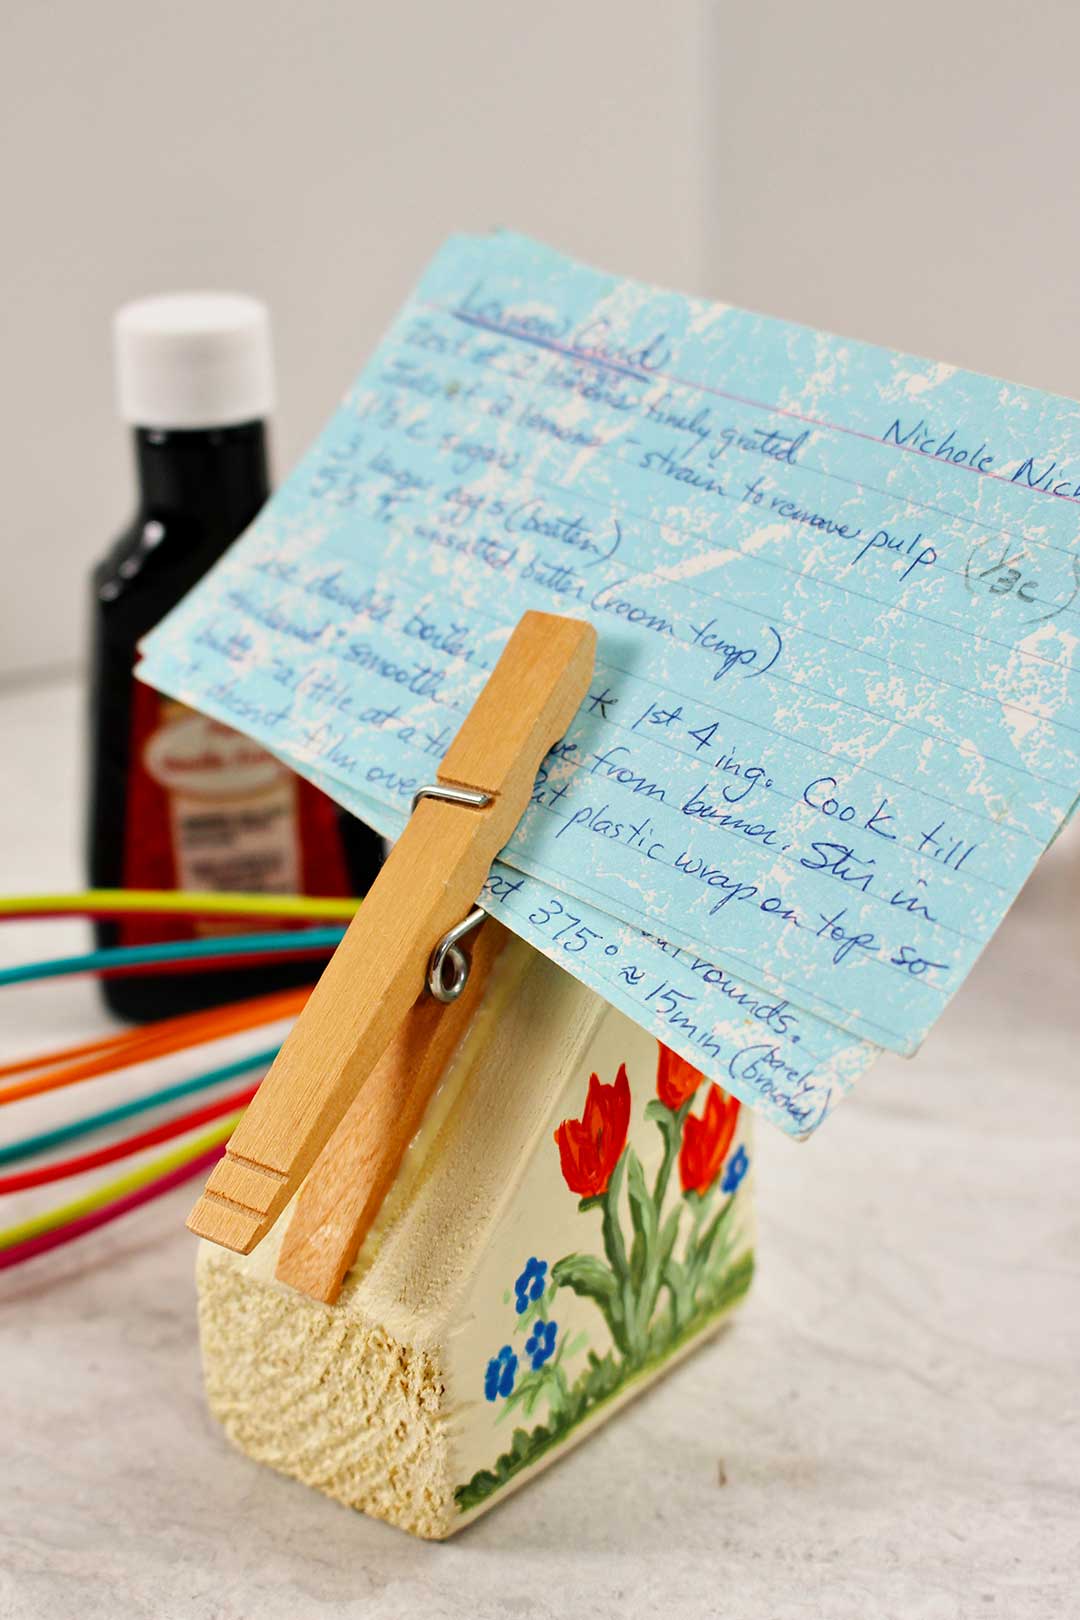 Completed recipe card holder painted with red tulips holds a blue recipe card in the clothes pin.